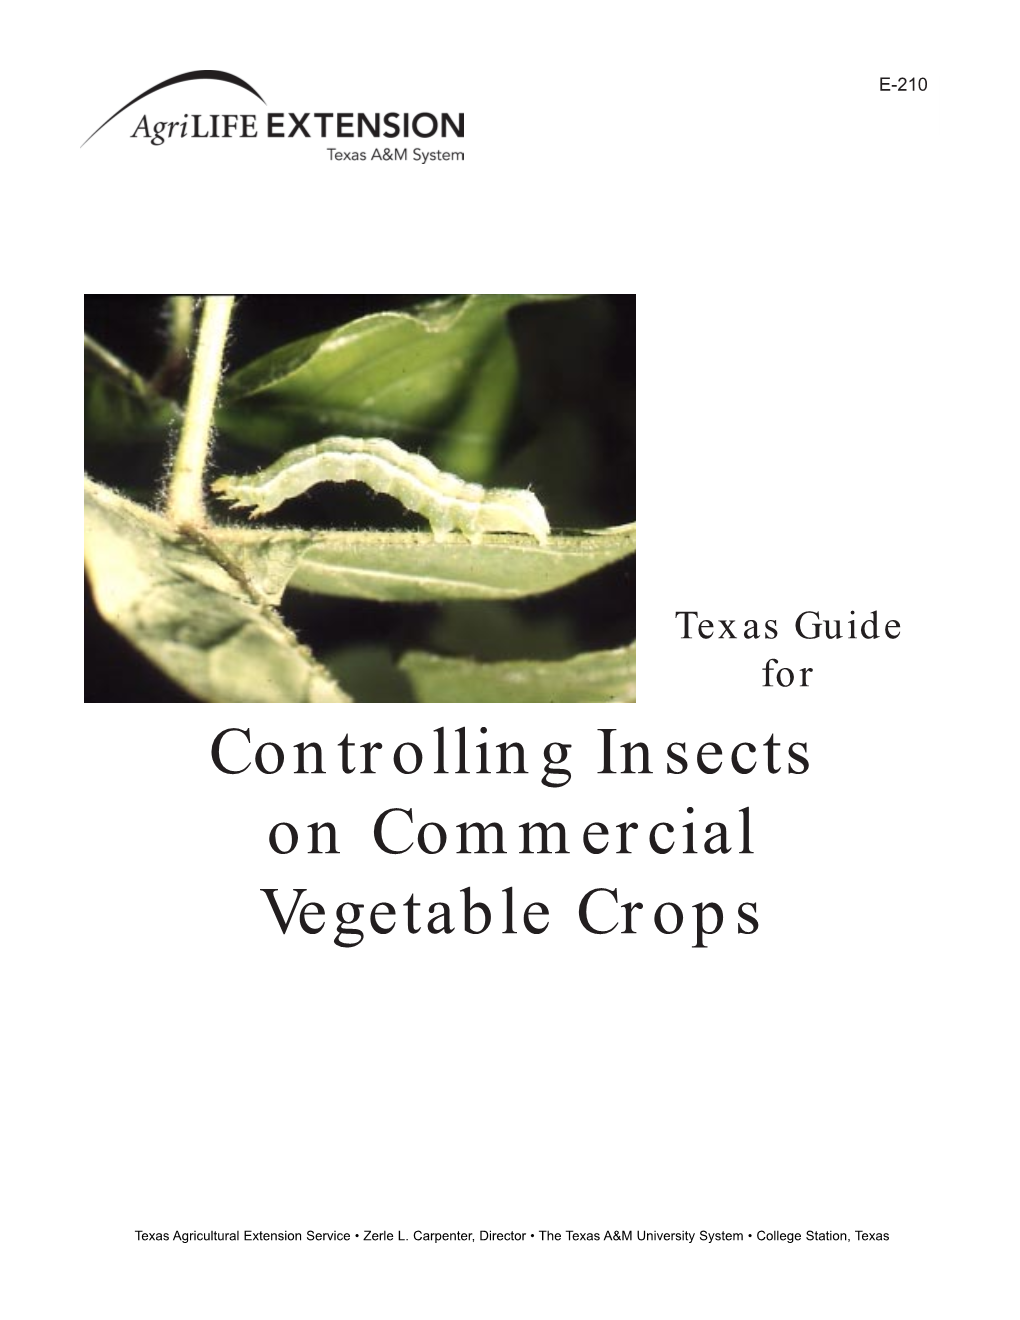 Texas Guide for Controlling Insects on Commercial Vegetable Crops